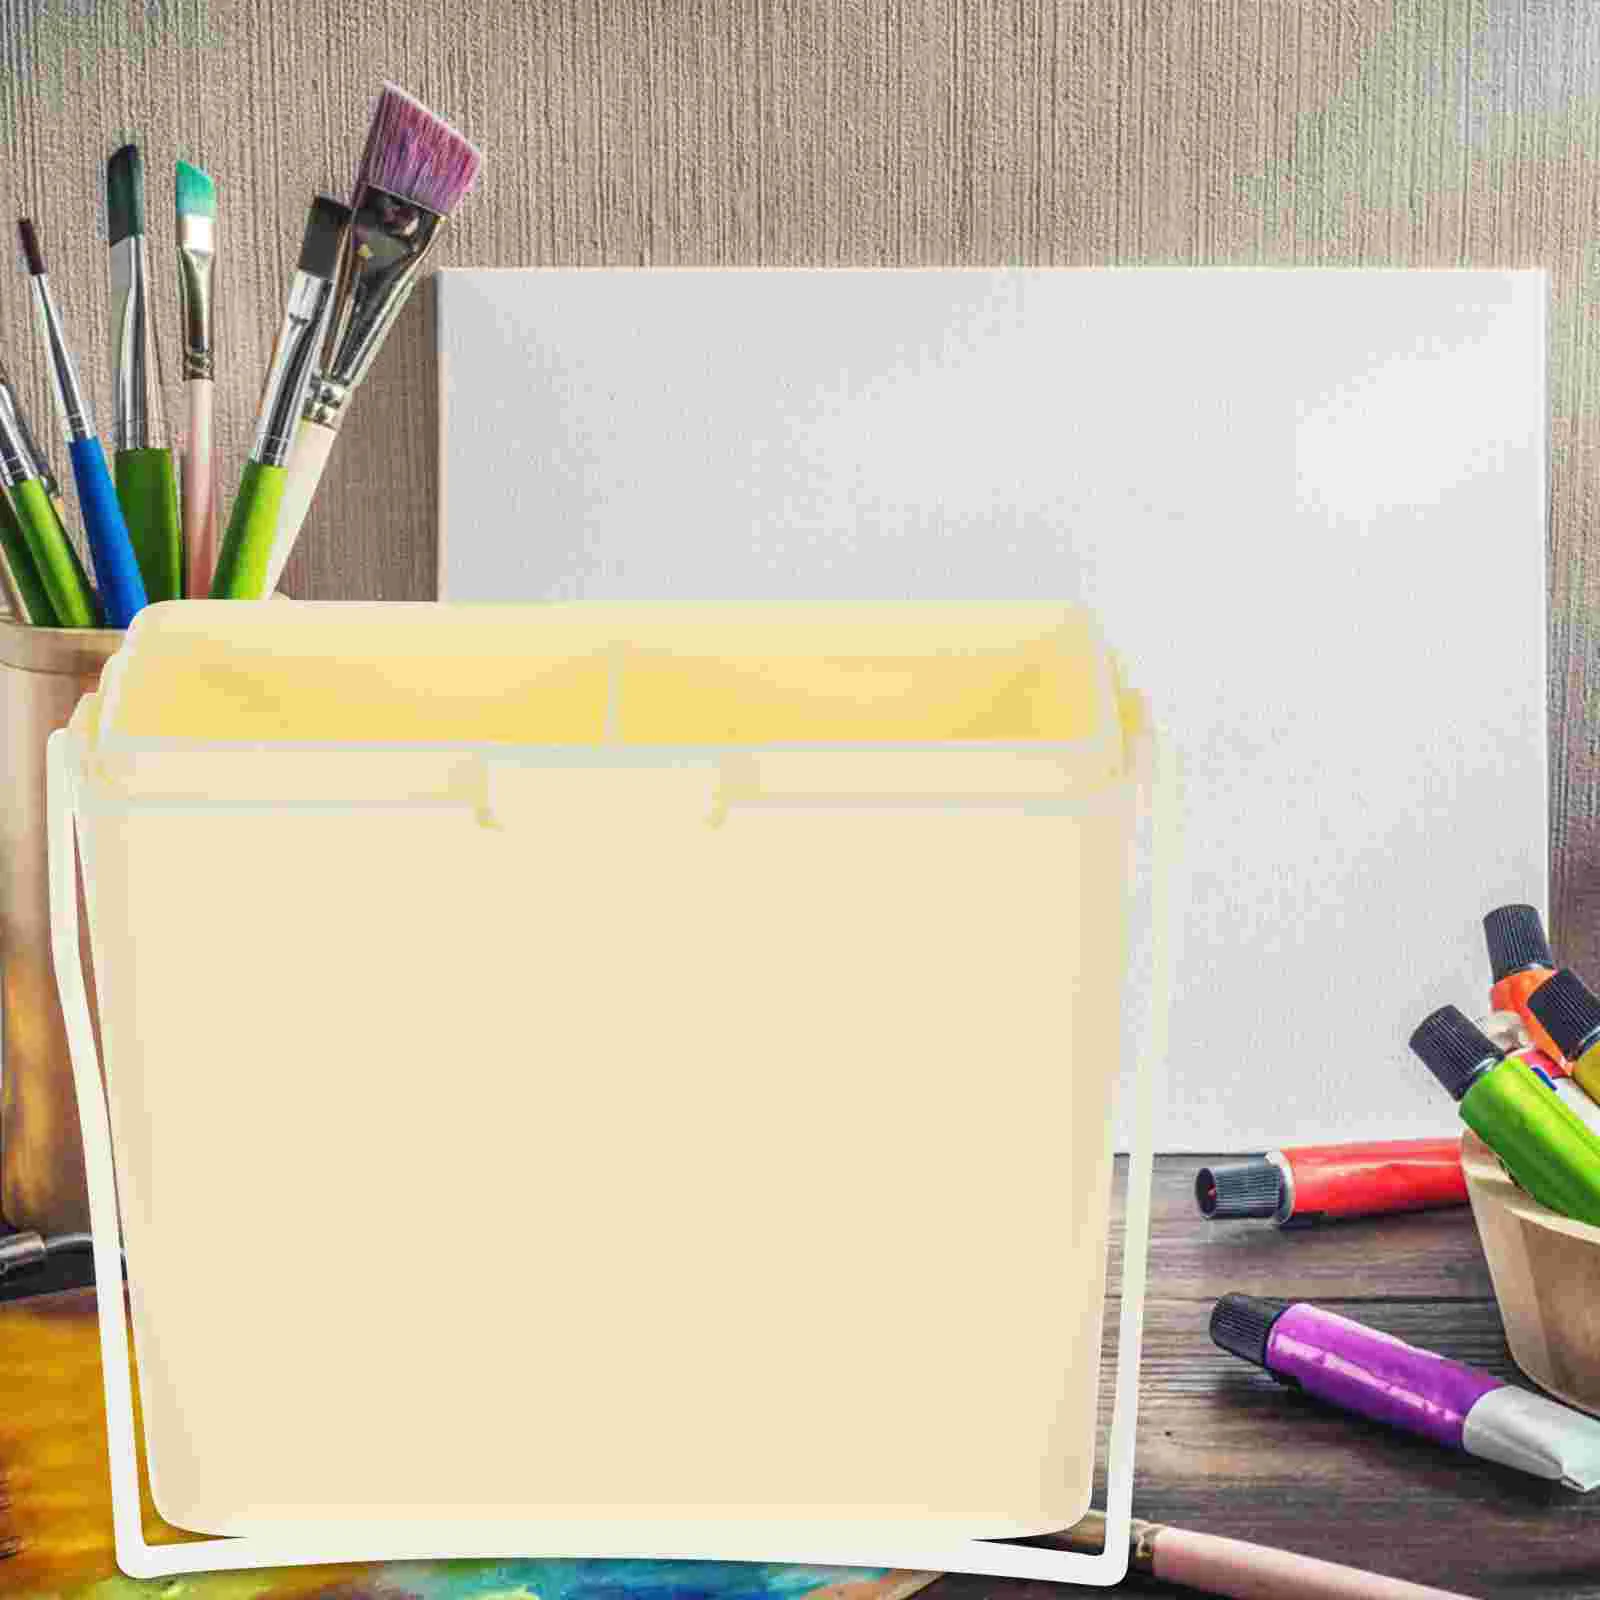 

Bucket Watercolor School Brush Holder Detergent Plastic Washer Handle Paint Cleaner Compact Pp Daily Use Artist Office